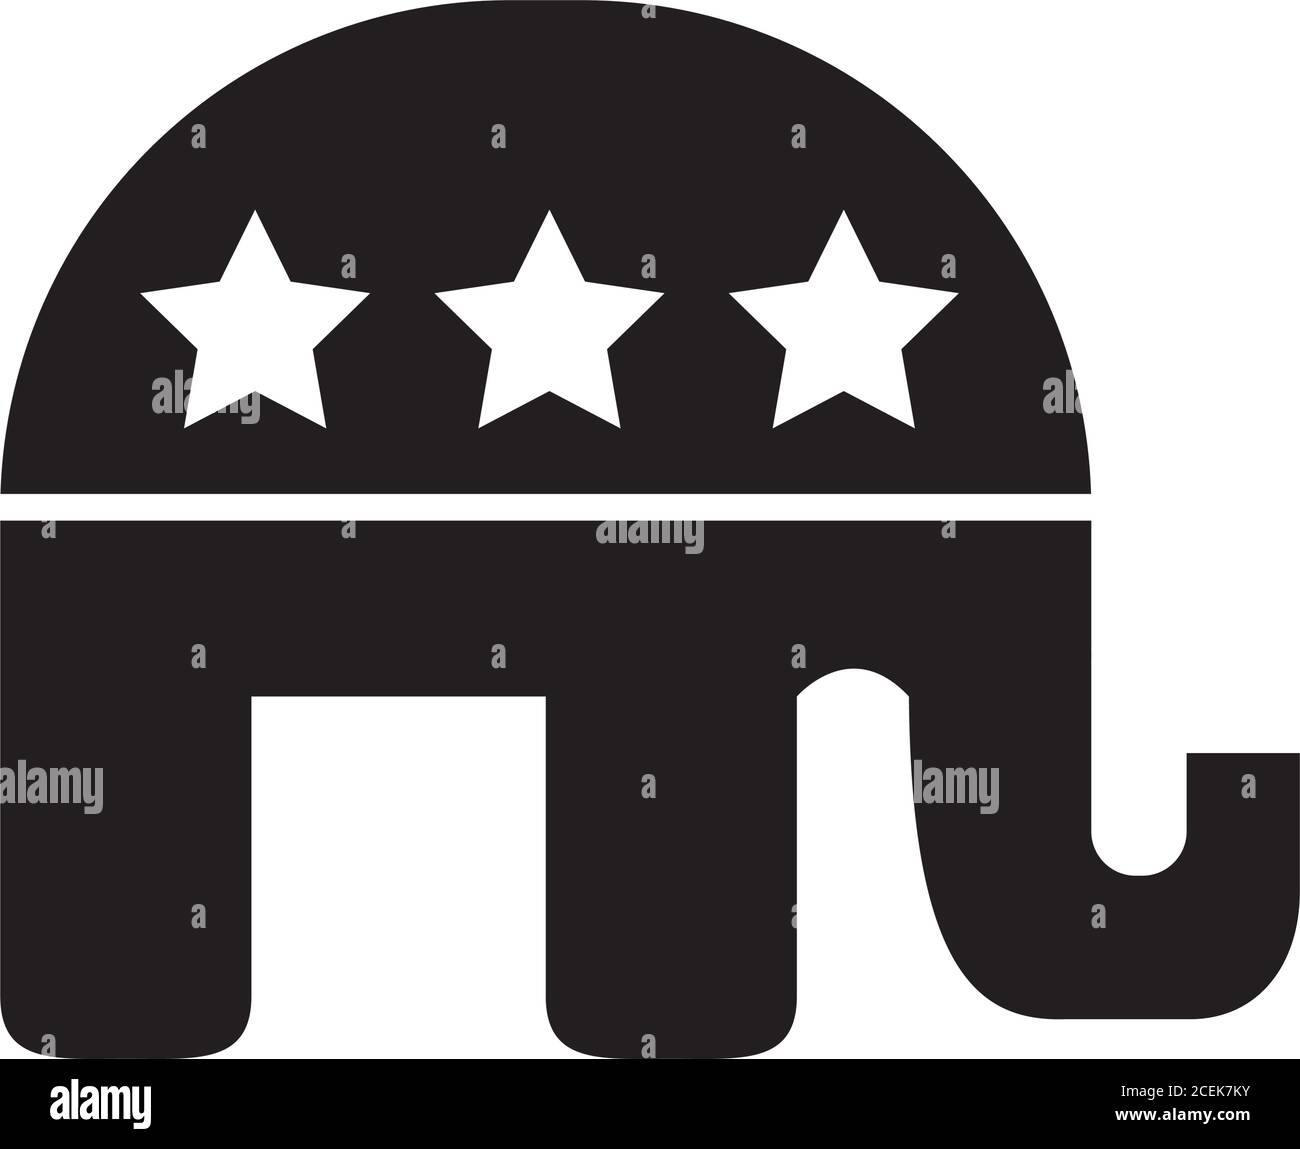 usa republican elephant icon over white background, silhouette style, vector illustration Stock Vector